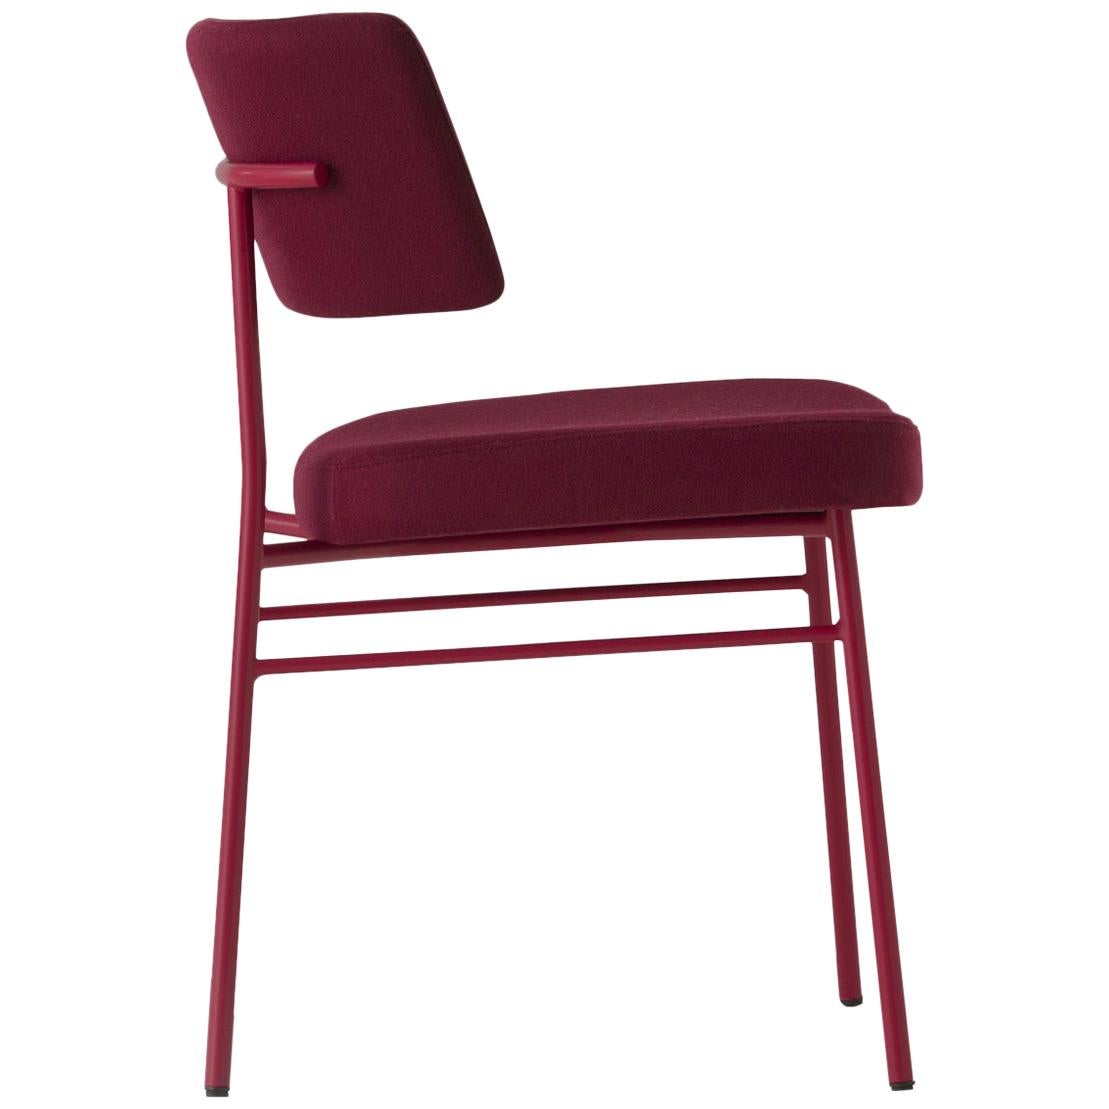 Marlen Chair, Red, Indoor, Chair, Made in Italy, Home, Contract For Sale